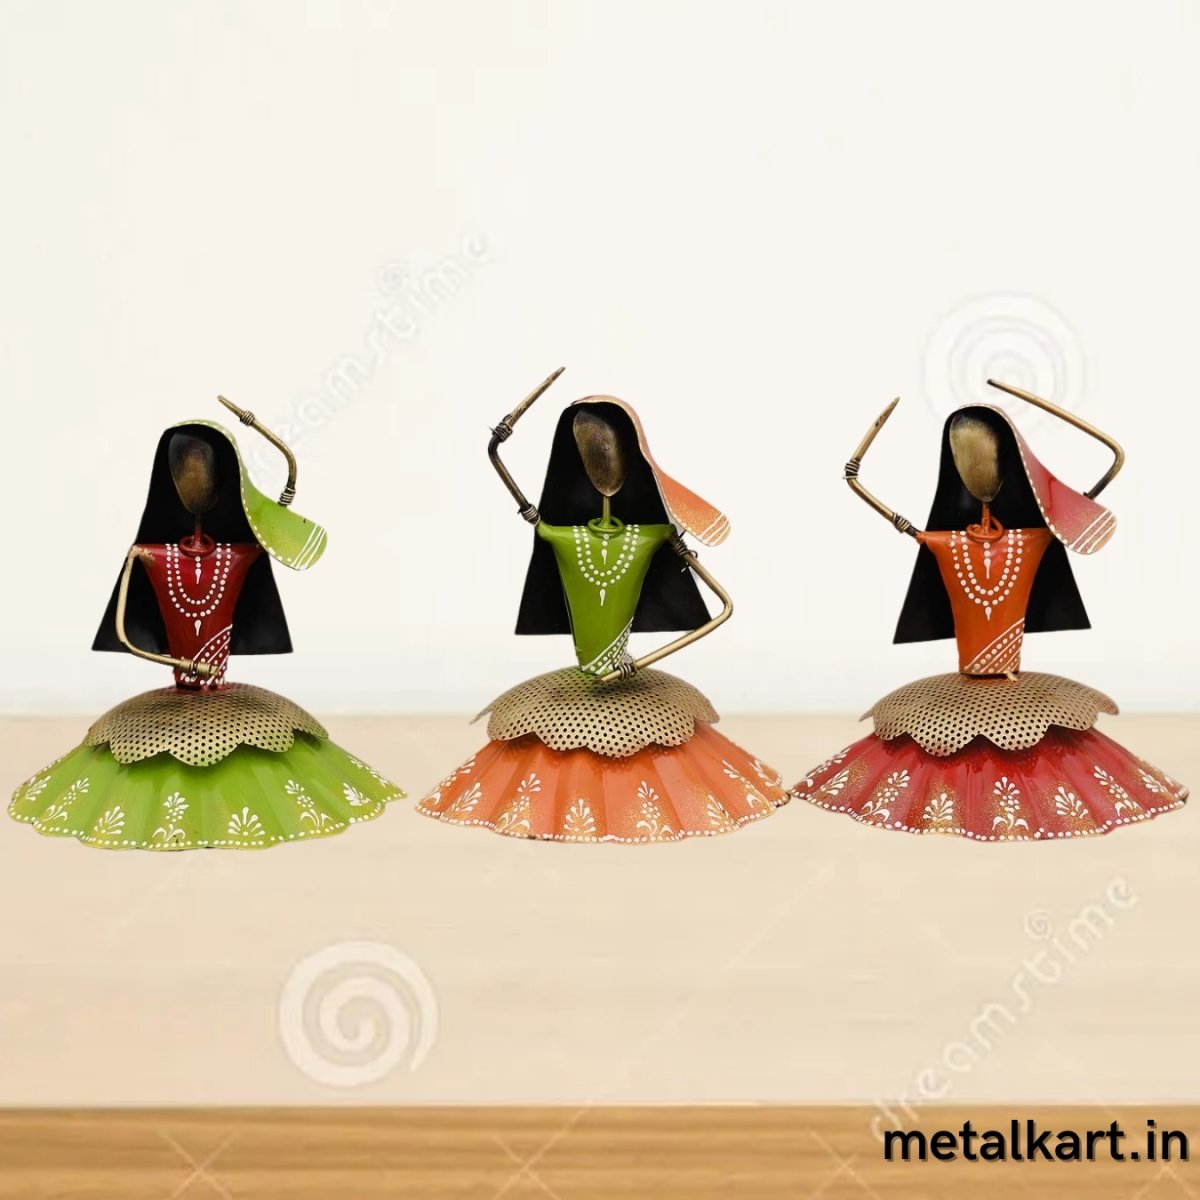 Handcrafted Set of 3 Traditional Rajasthani Kalbeliya Dancers Table décor (8*8*10 Inches)